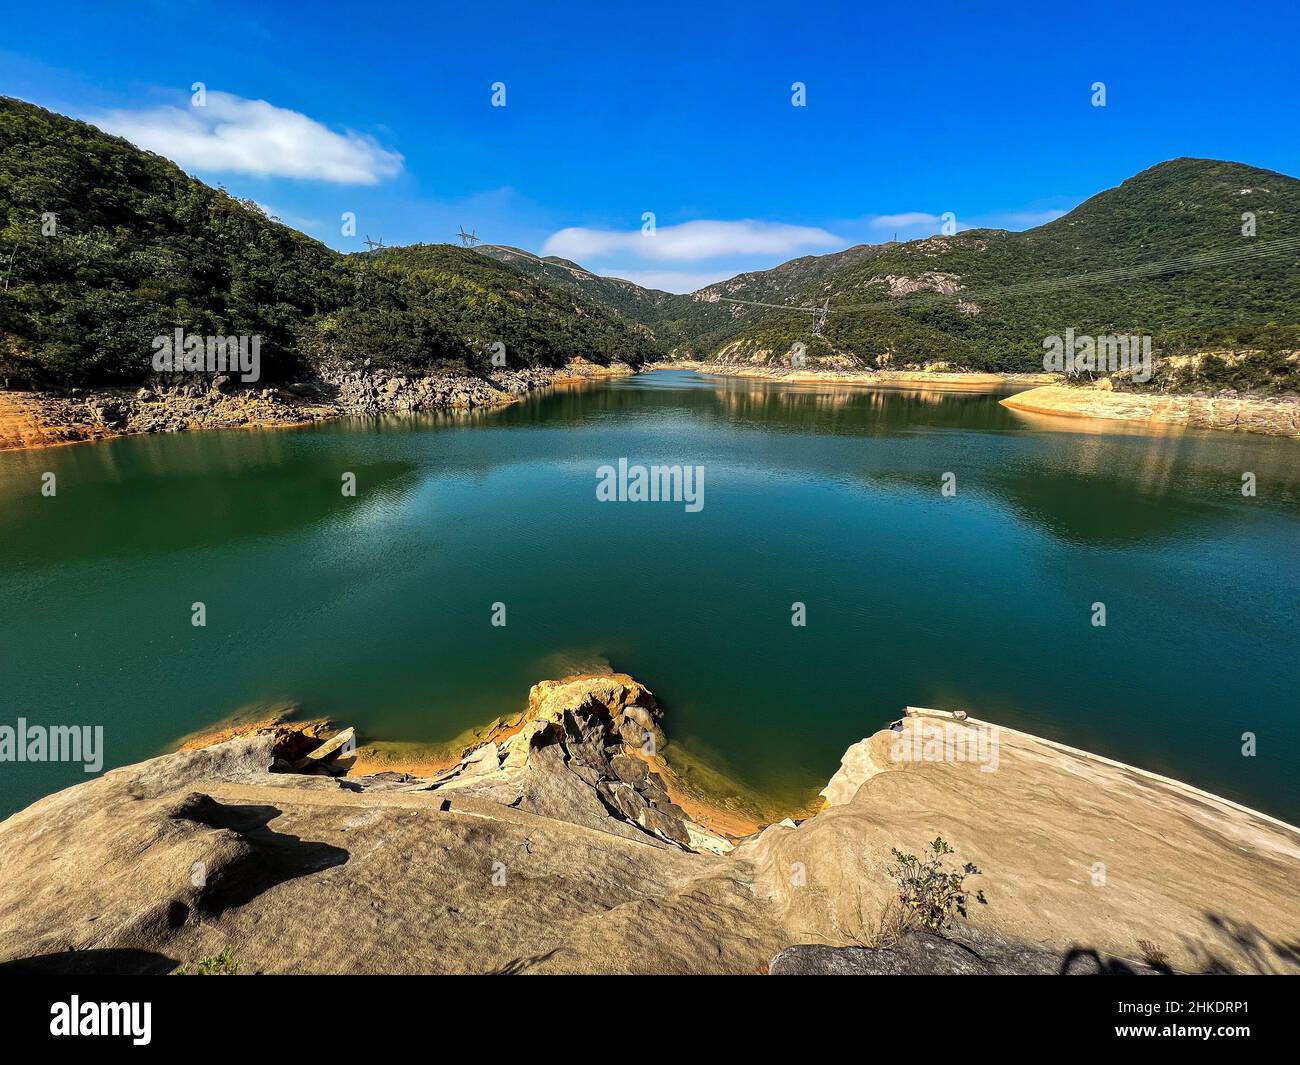 A view of a lake in the Tai Tam Intermediate Reservoir in Hong Kong Stock Photo